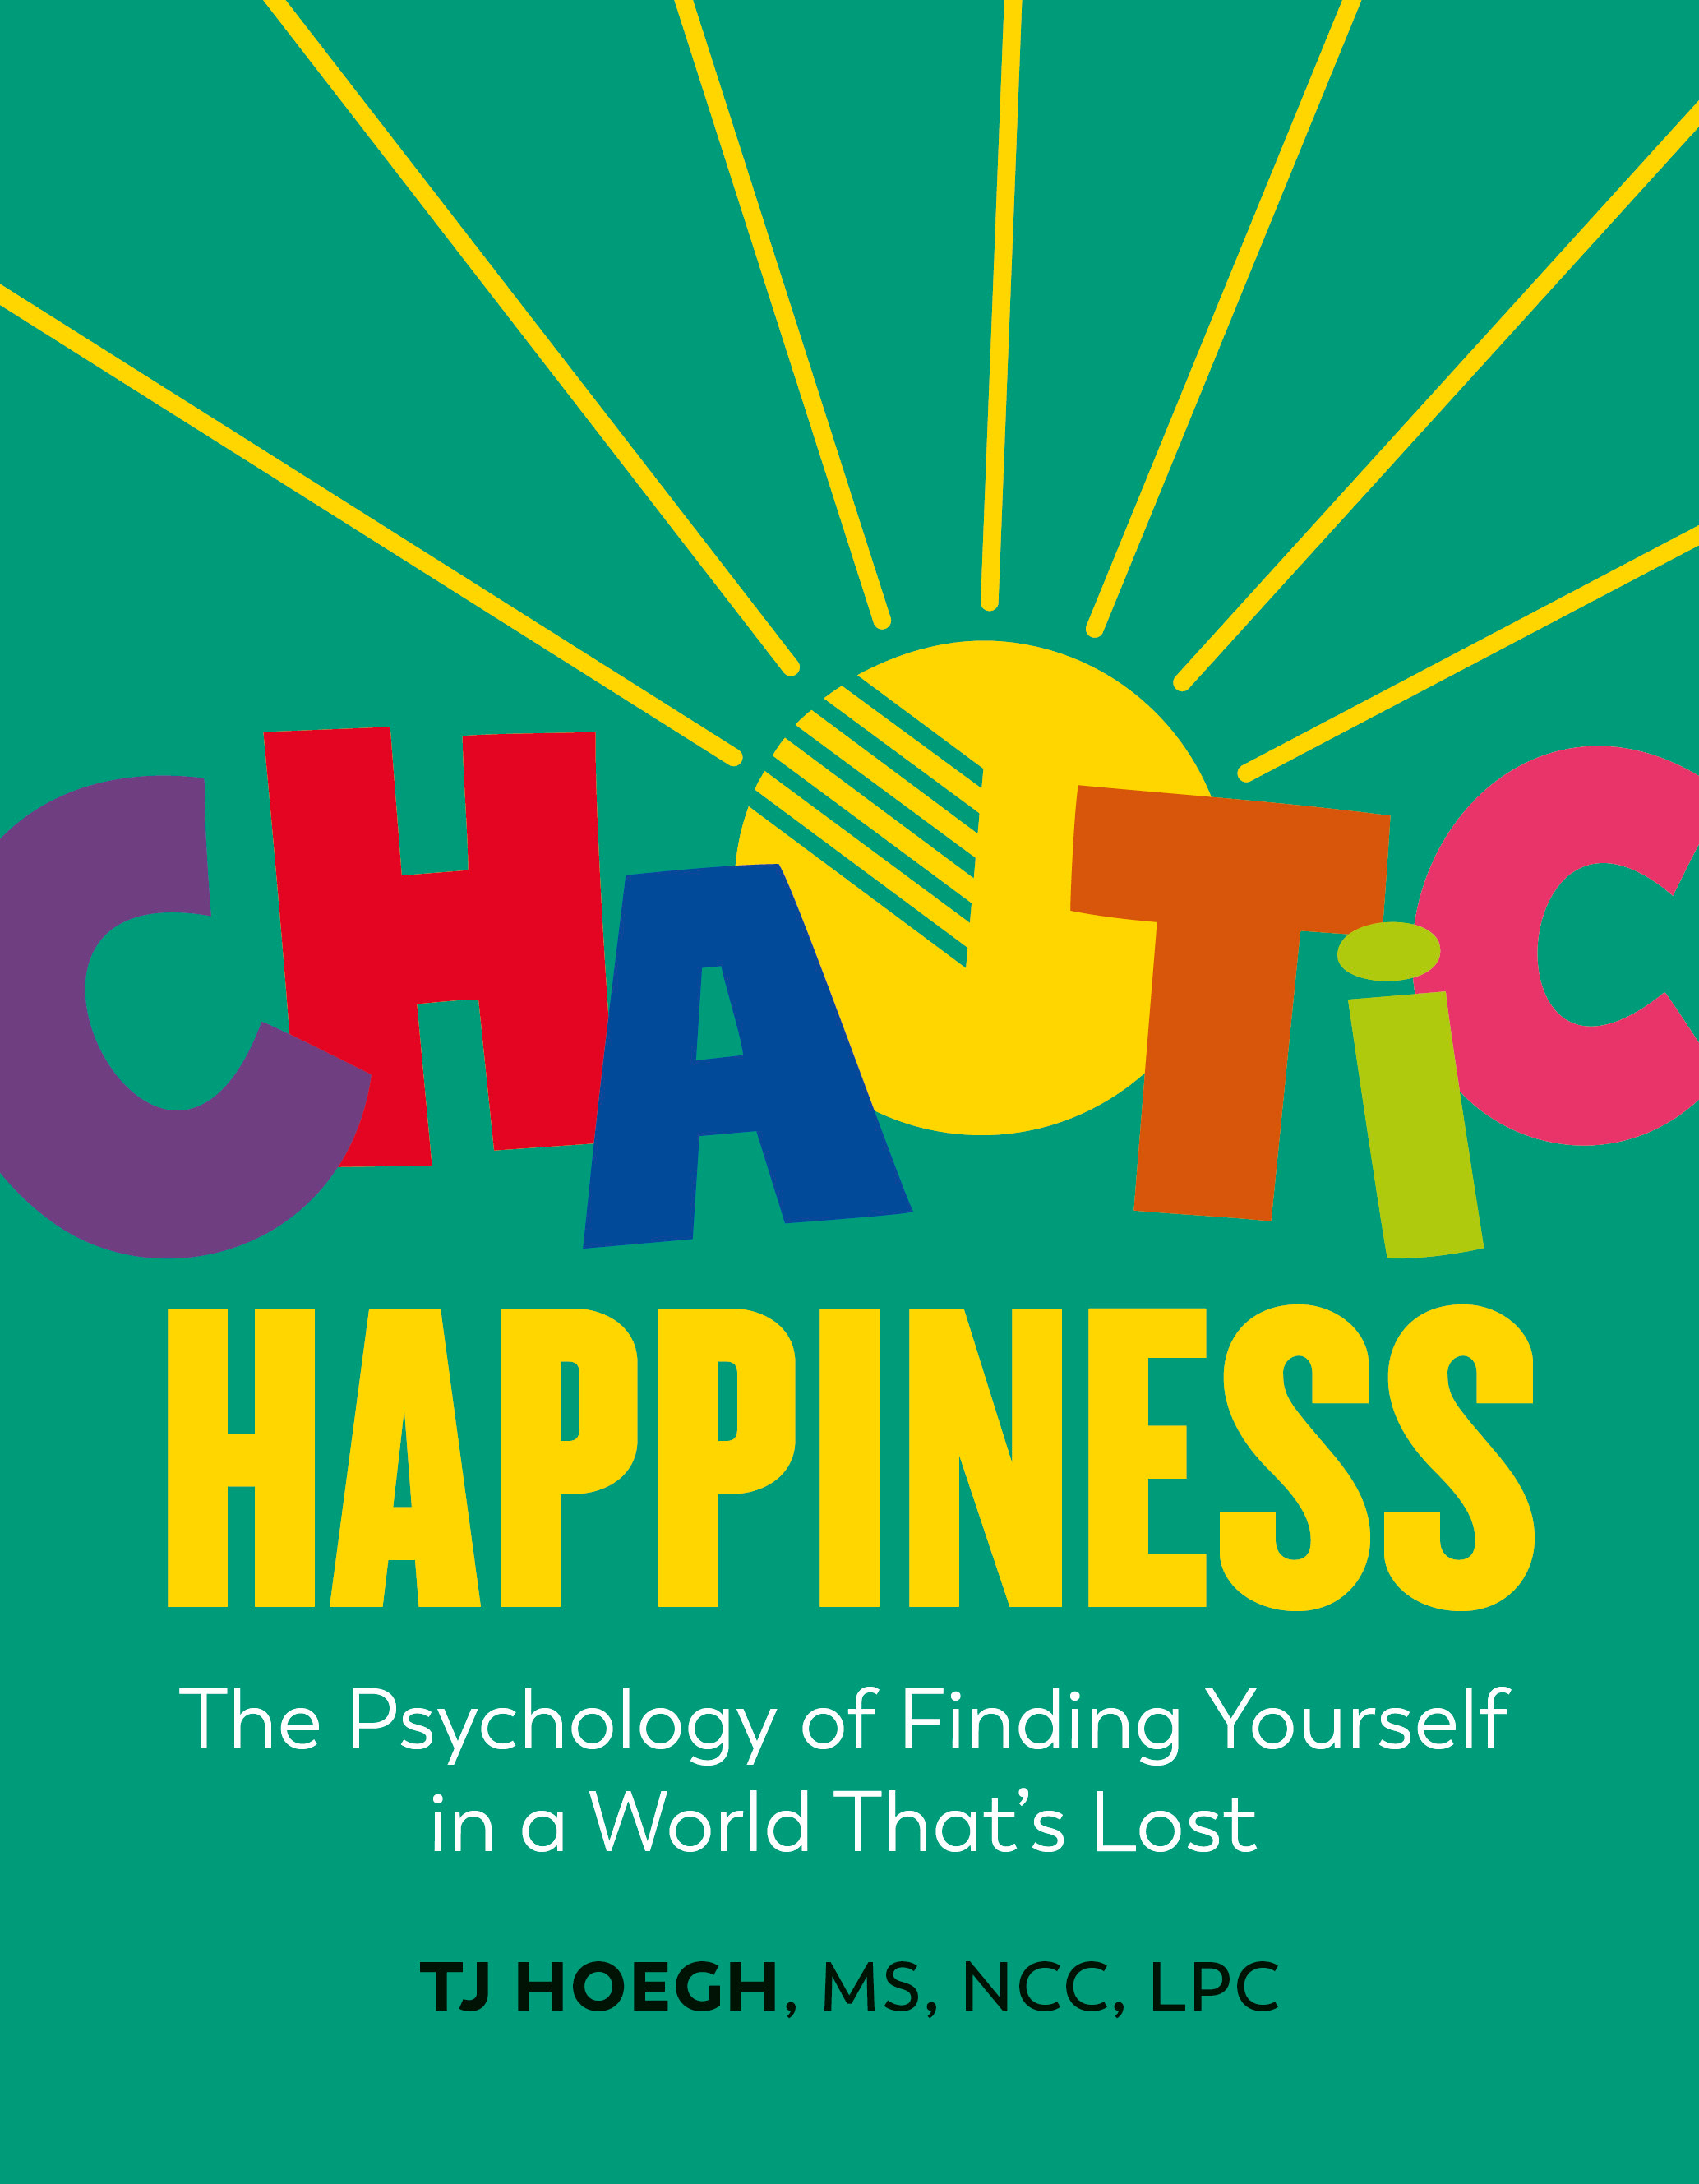 Chaotic Happiness : The Psychology of Finding Yourself in a World That's Lost | Psychology & Self-Improvement